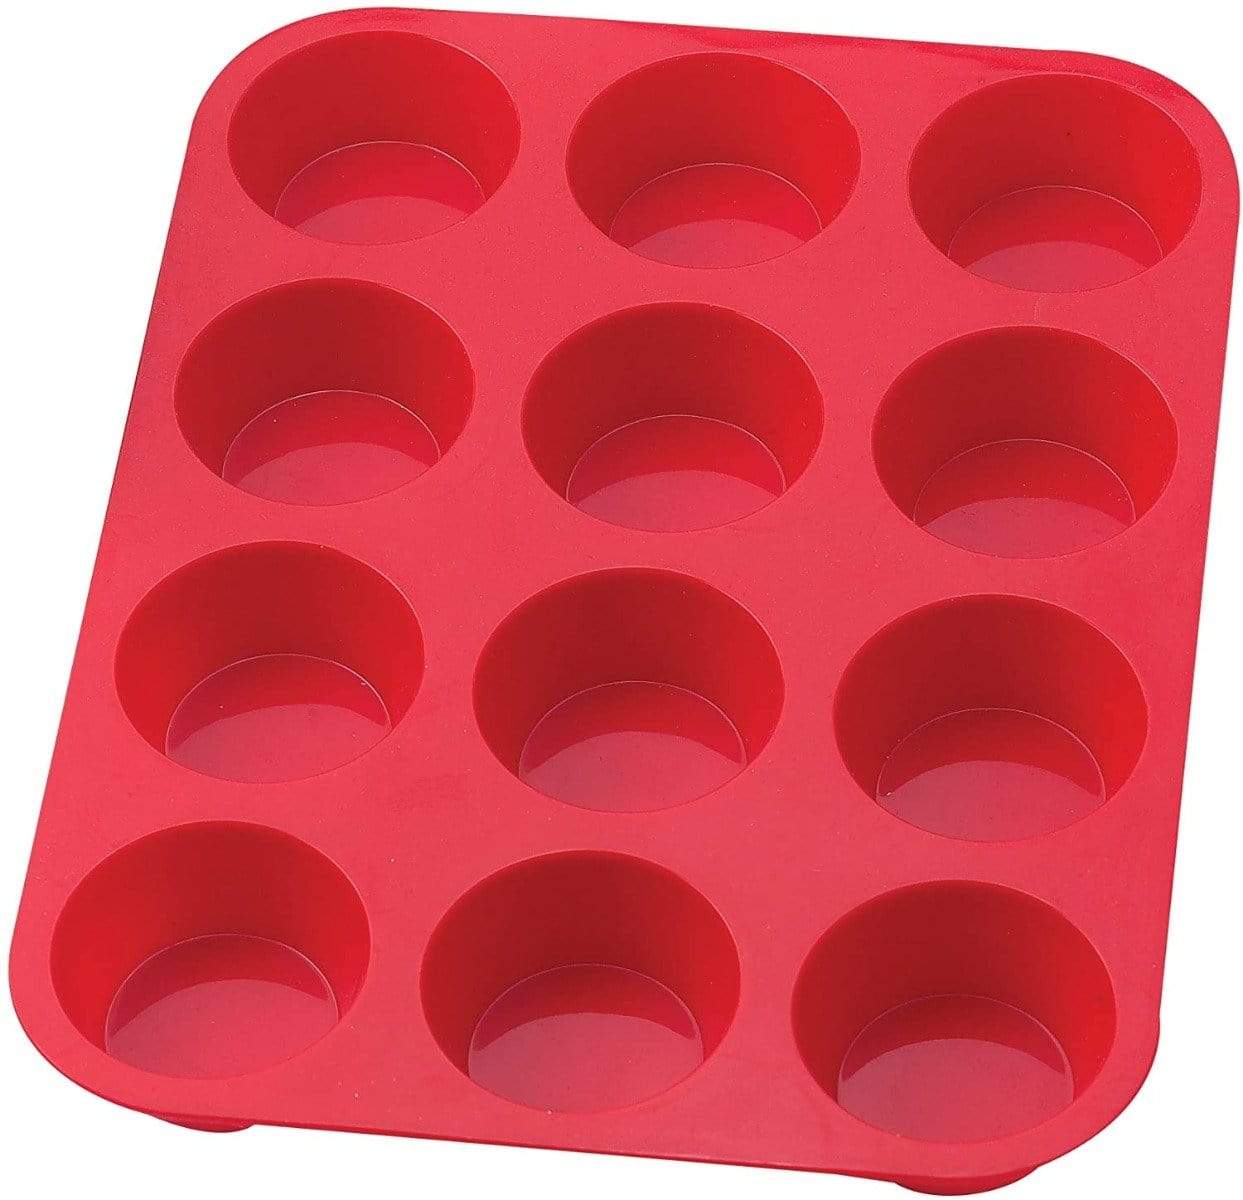 Mrs. Anderson's Cupcake & Muffin Pans Mrs. Anderson's Silicone Muffin Pan